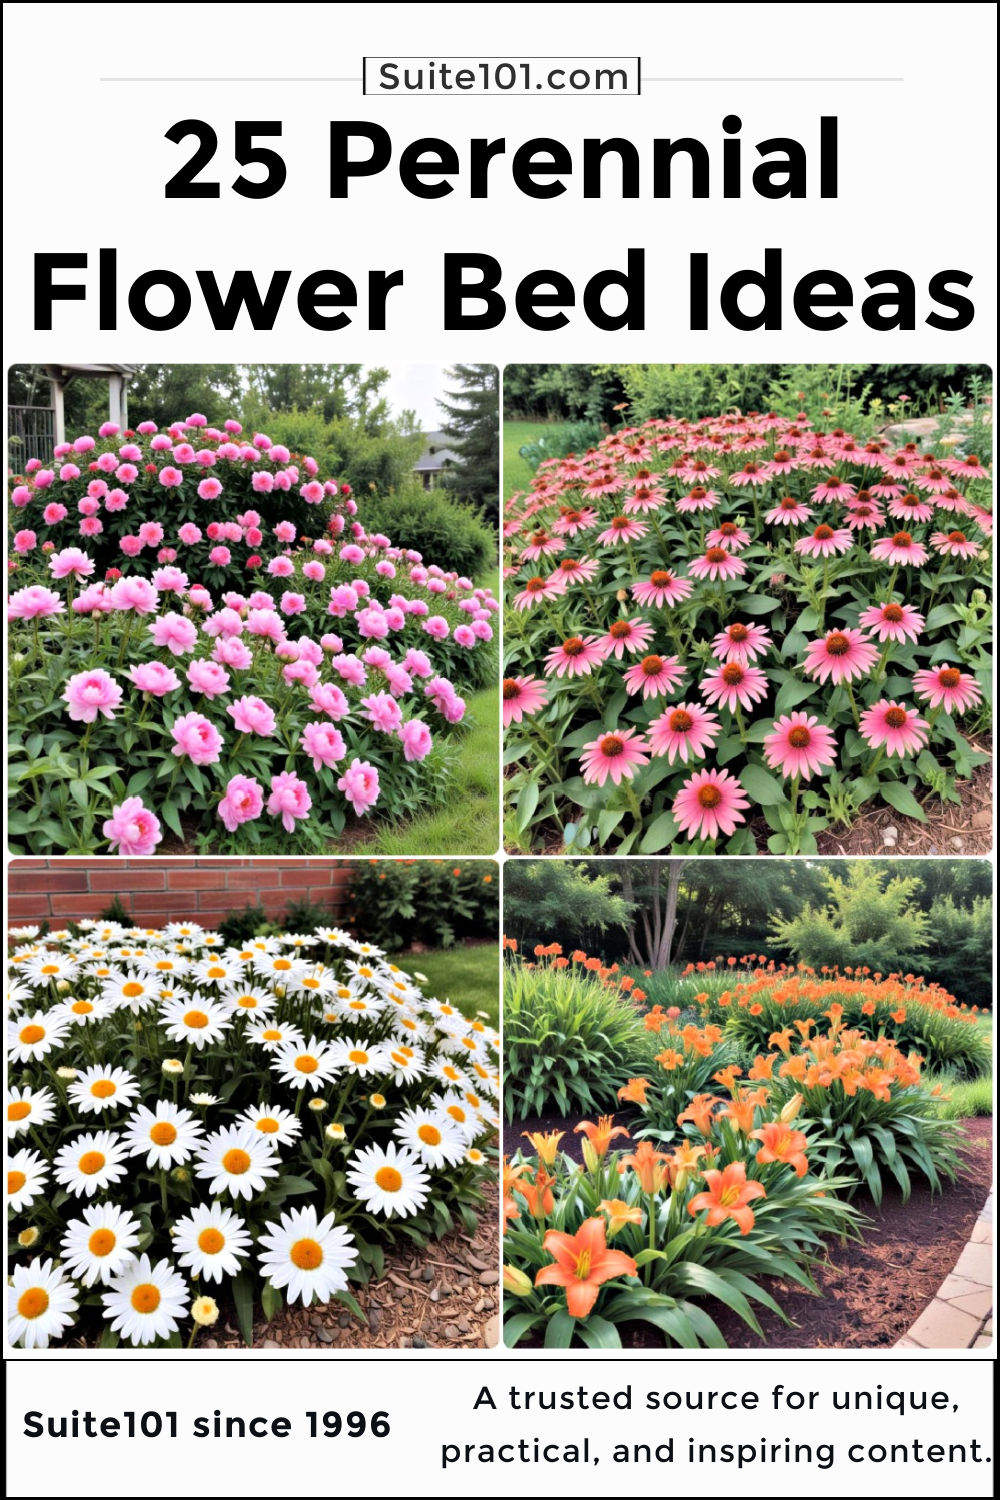 25 Perennial Flower Bed Ideas and Designs